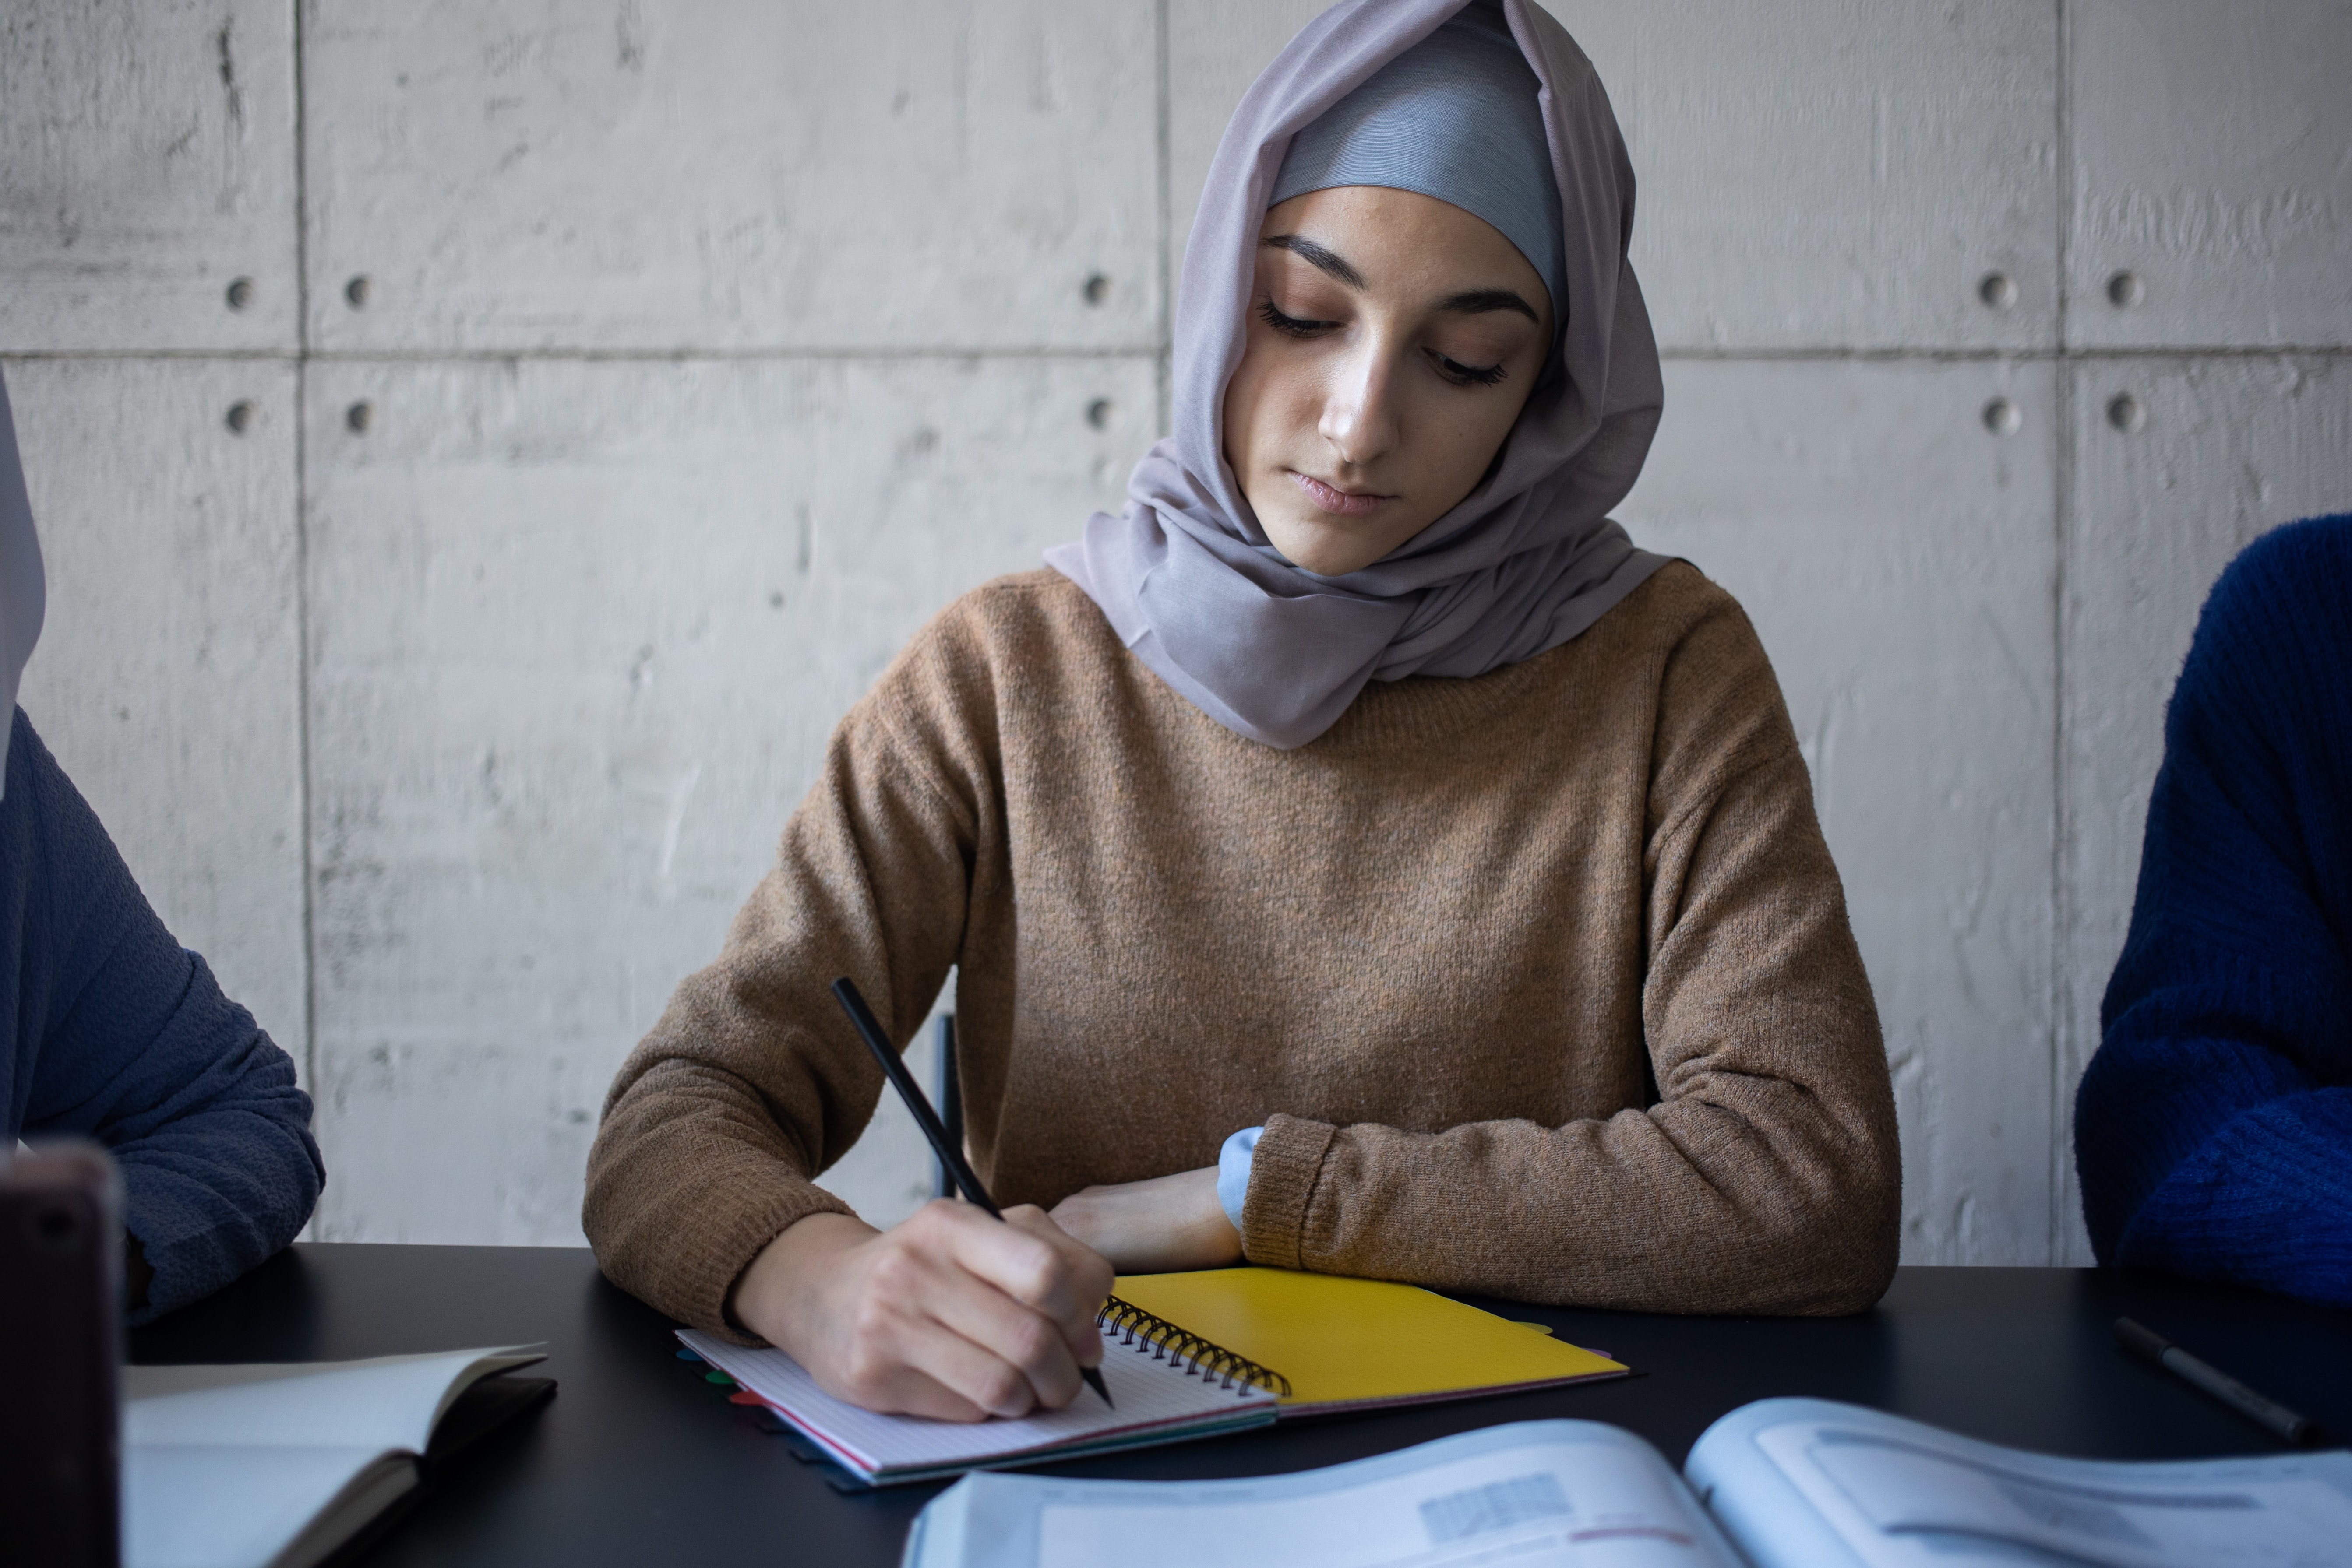 A person with a beige sweater and light purple headscarf takes notes in a notebook.